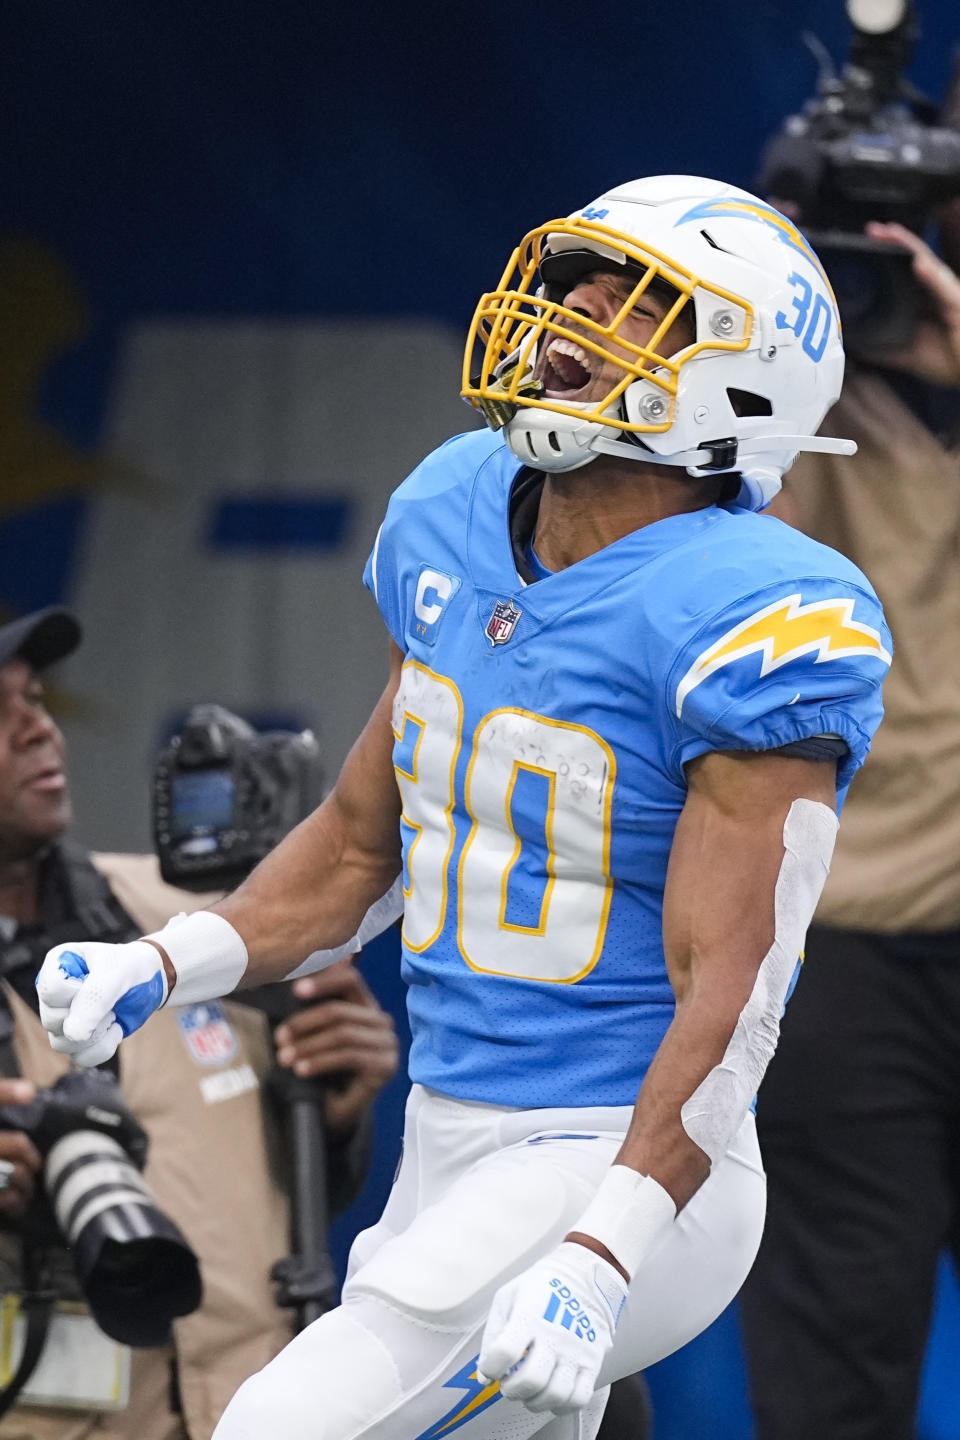 Los Angeles Chargers running back Austin Ekeler celebrates his touchdown against the Los Angeles Rams during the first half of an NFL football game Sunday, Jan. 1, 2023, in Inglewood, Calif. (AP Photo/Mark J. Terrill)